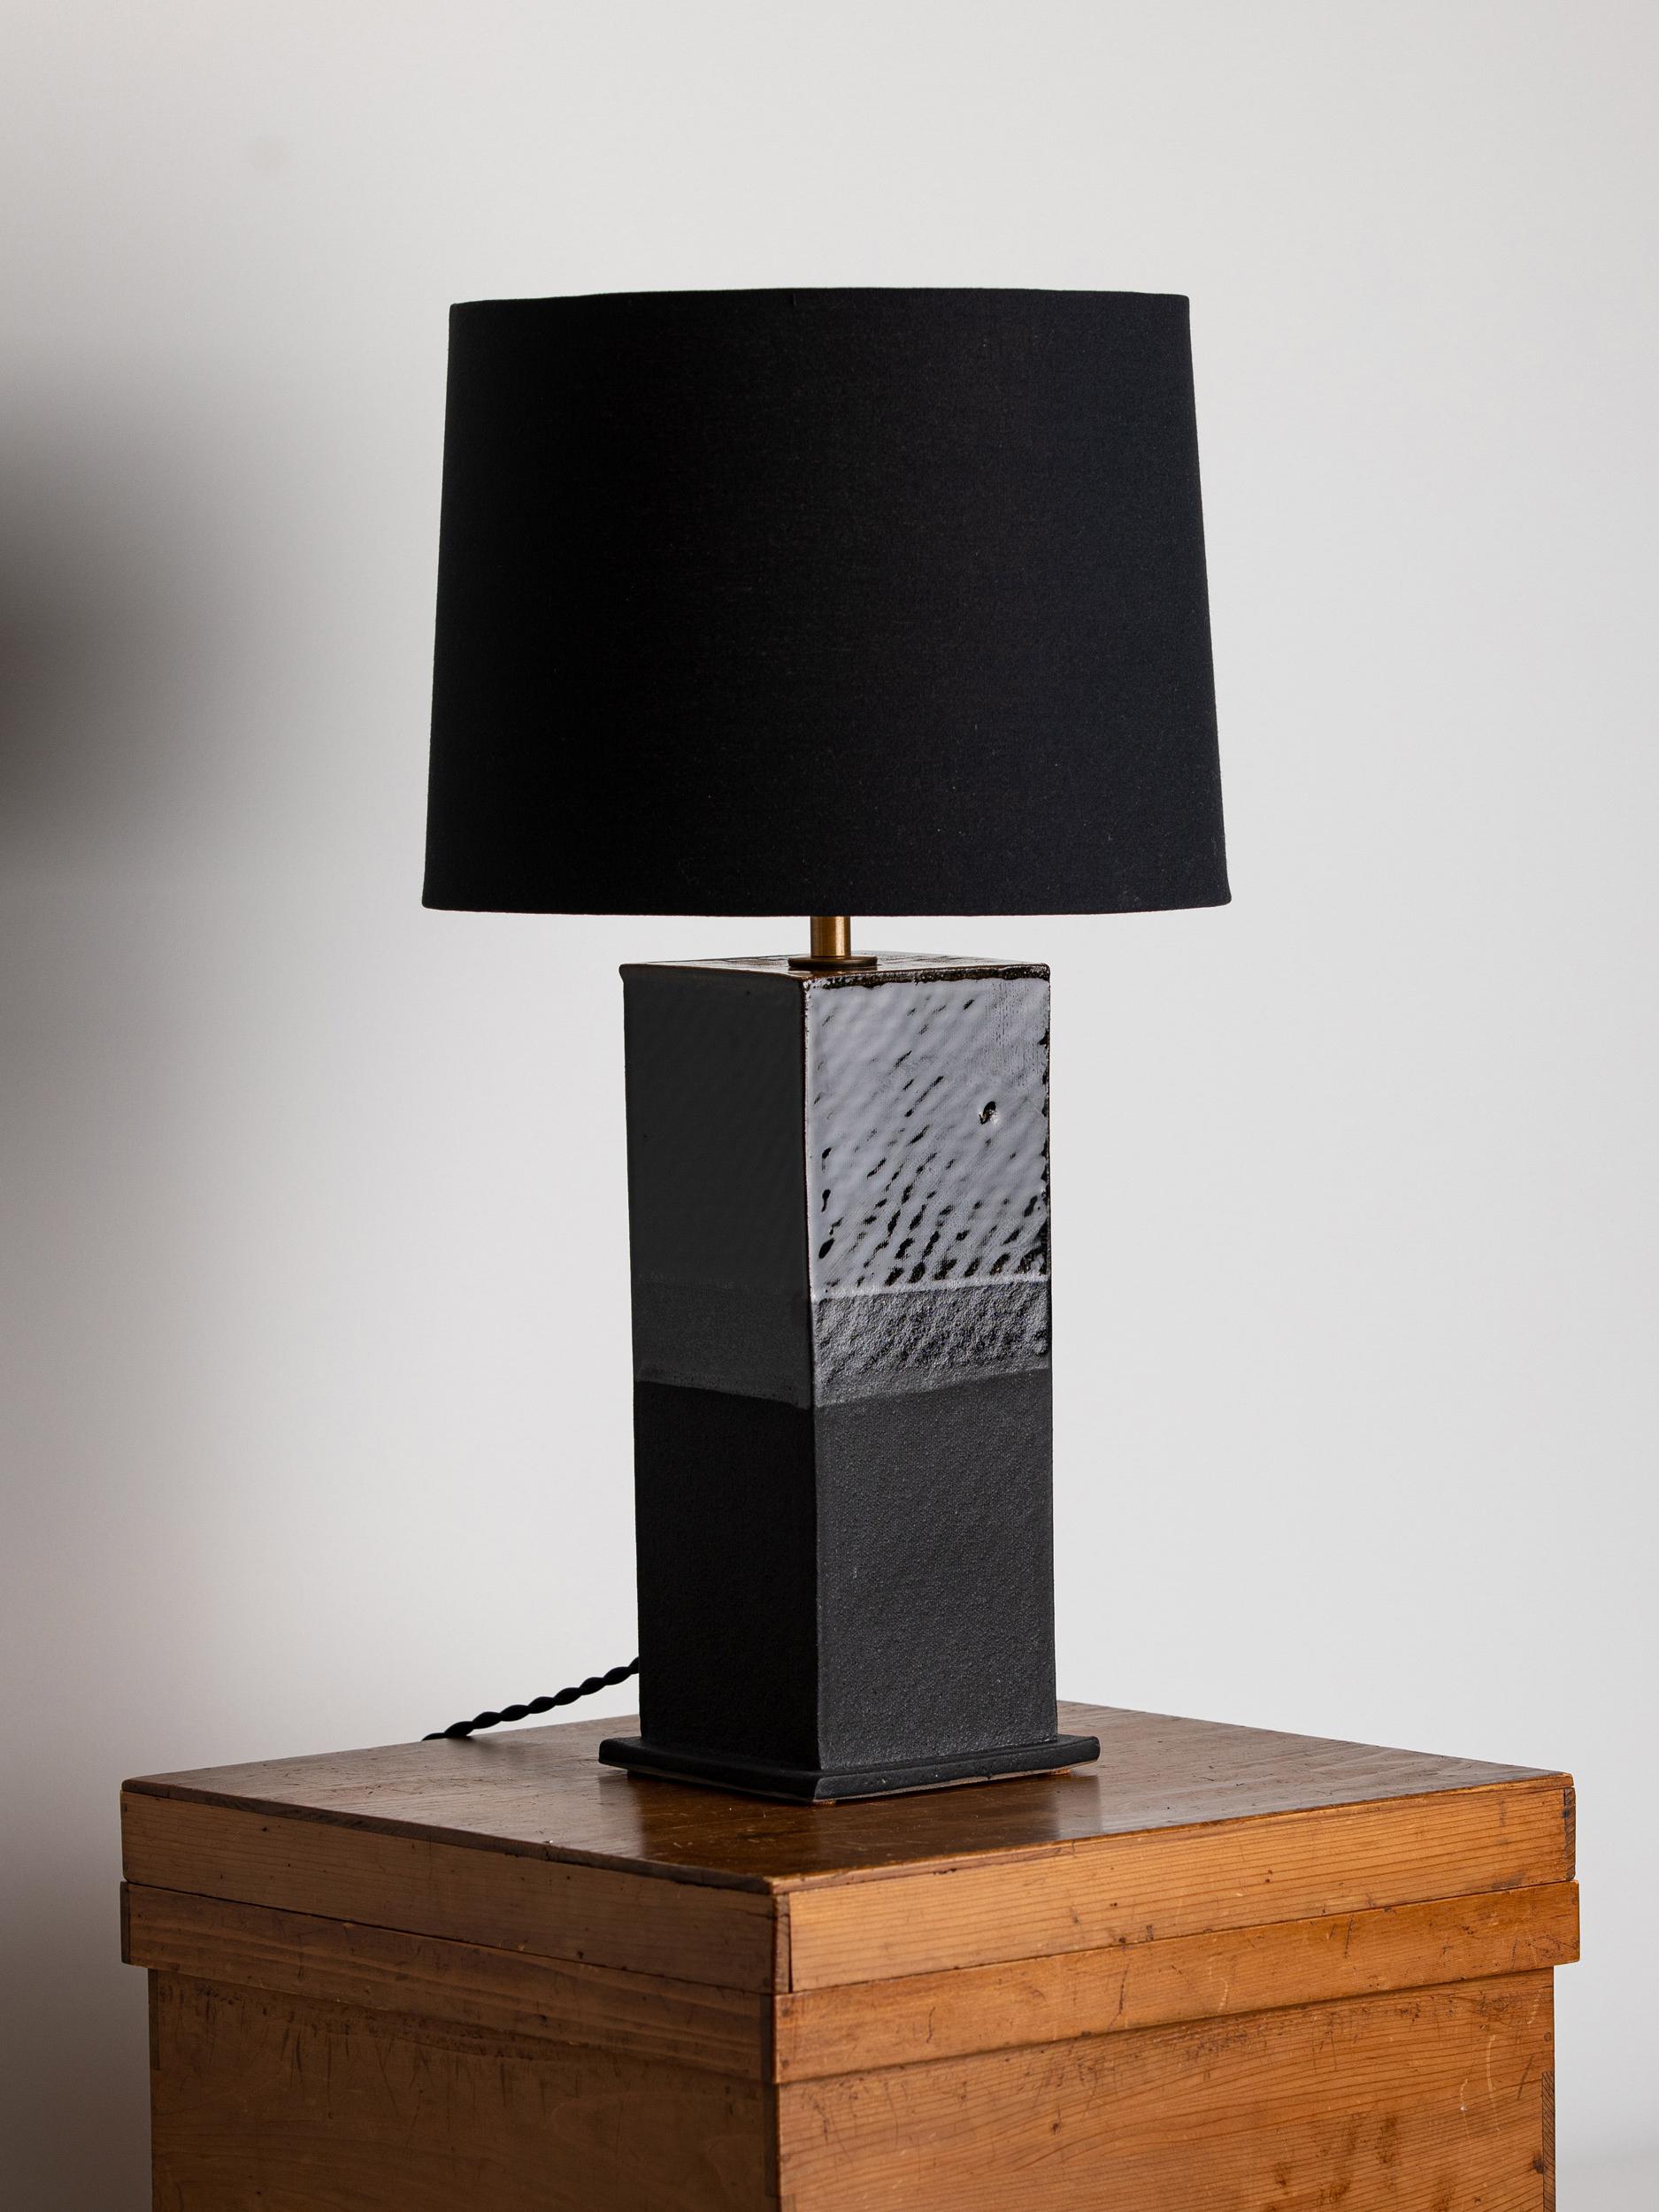 Our stoneware Sag Harbor lamp is handcrafted using slab-construction techniques.

Finish

- Dipped glaze, two colors, pictured in matte-black & bottle-green 
- Antique brass fittings
- Twisted black-cloth cord
- Full-range dimmer socket
-